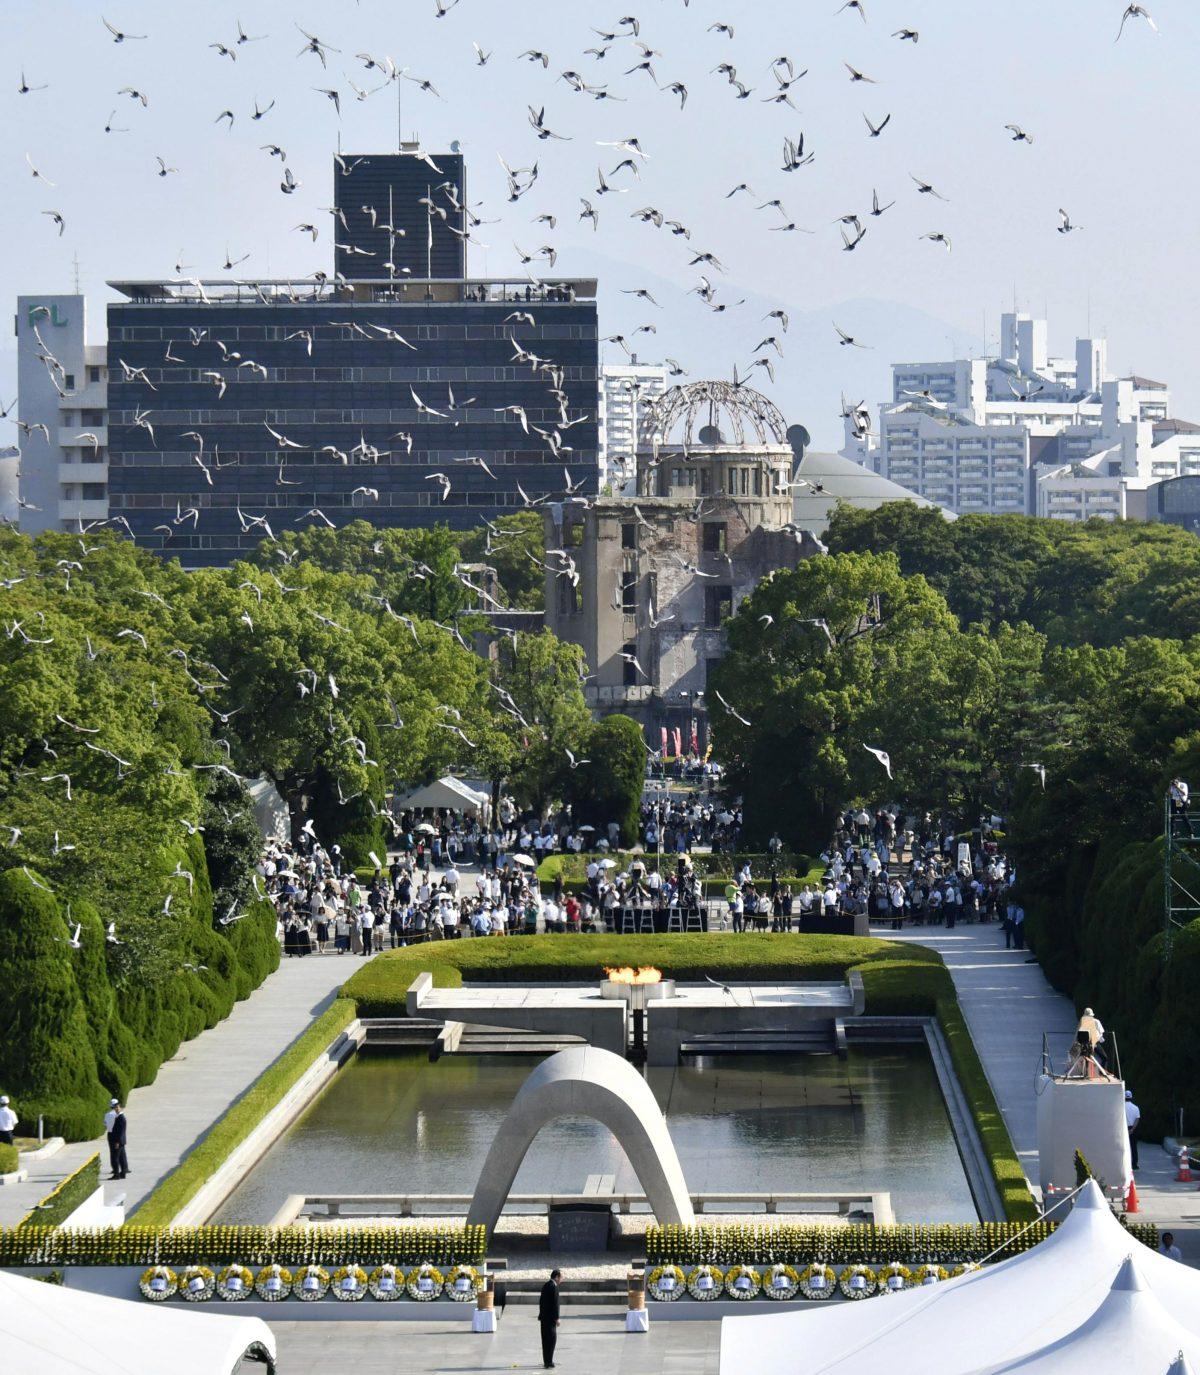 Doves fly over the cenotaph dedicated to the victims of the atomic bombing during a ceremony to mark the 73rd anniversary of the bombing at Hiroshima Peace Memorial Park in Hiroshima, western Japan, Monday, Aug. 6, 2018. The Atomic Bomb Dome is seen in center background. (Shingo Nishizume/Kyodo News via AP)